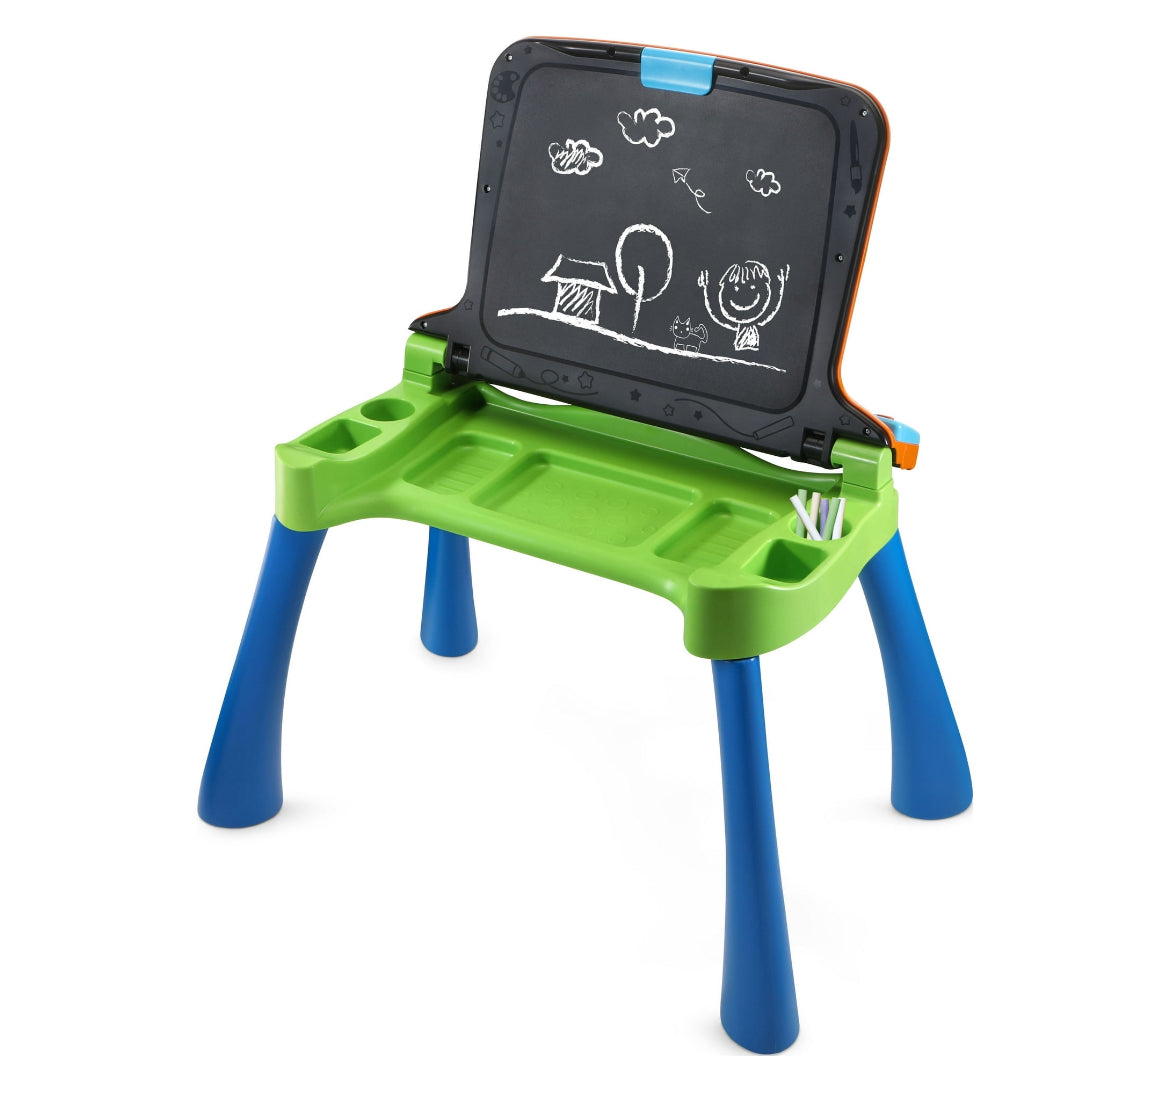 VTech Get Ready For School Learning Desk Interactive Learning Center